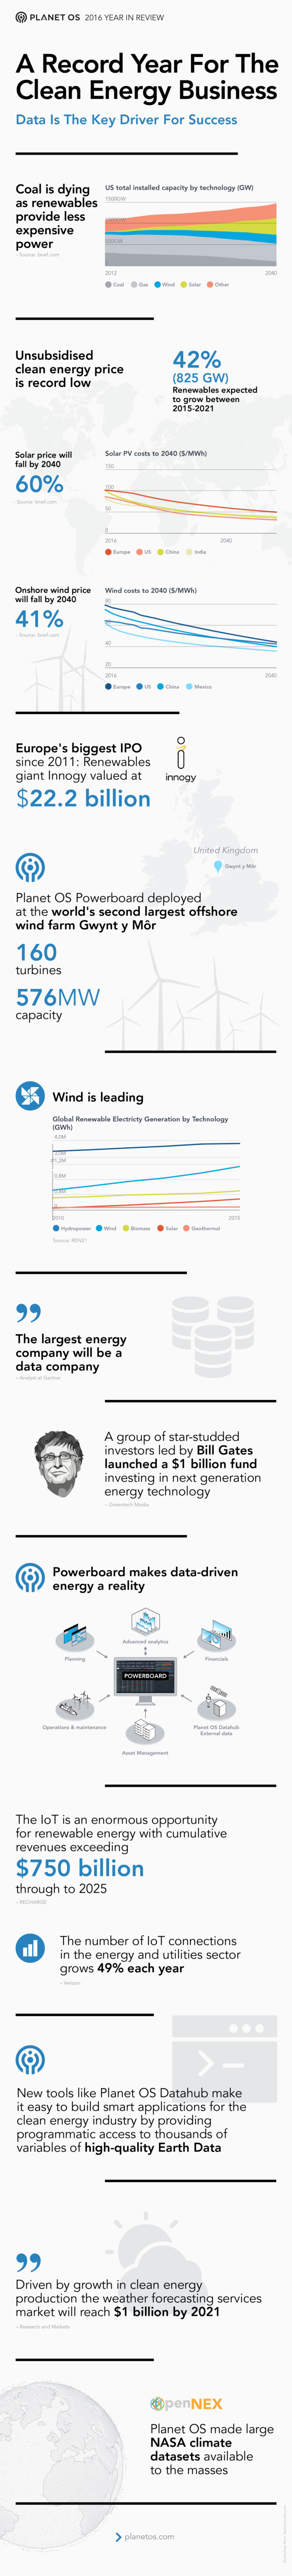 Infographics 2016 Clean Energy Business